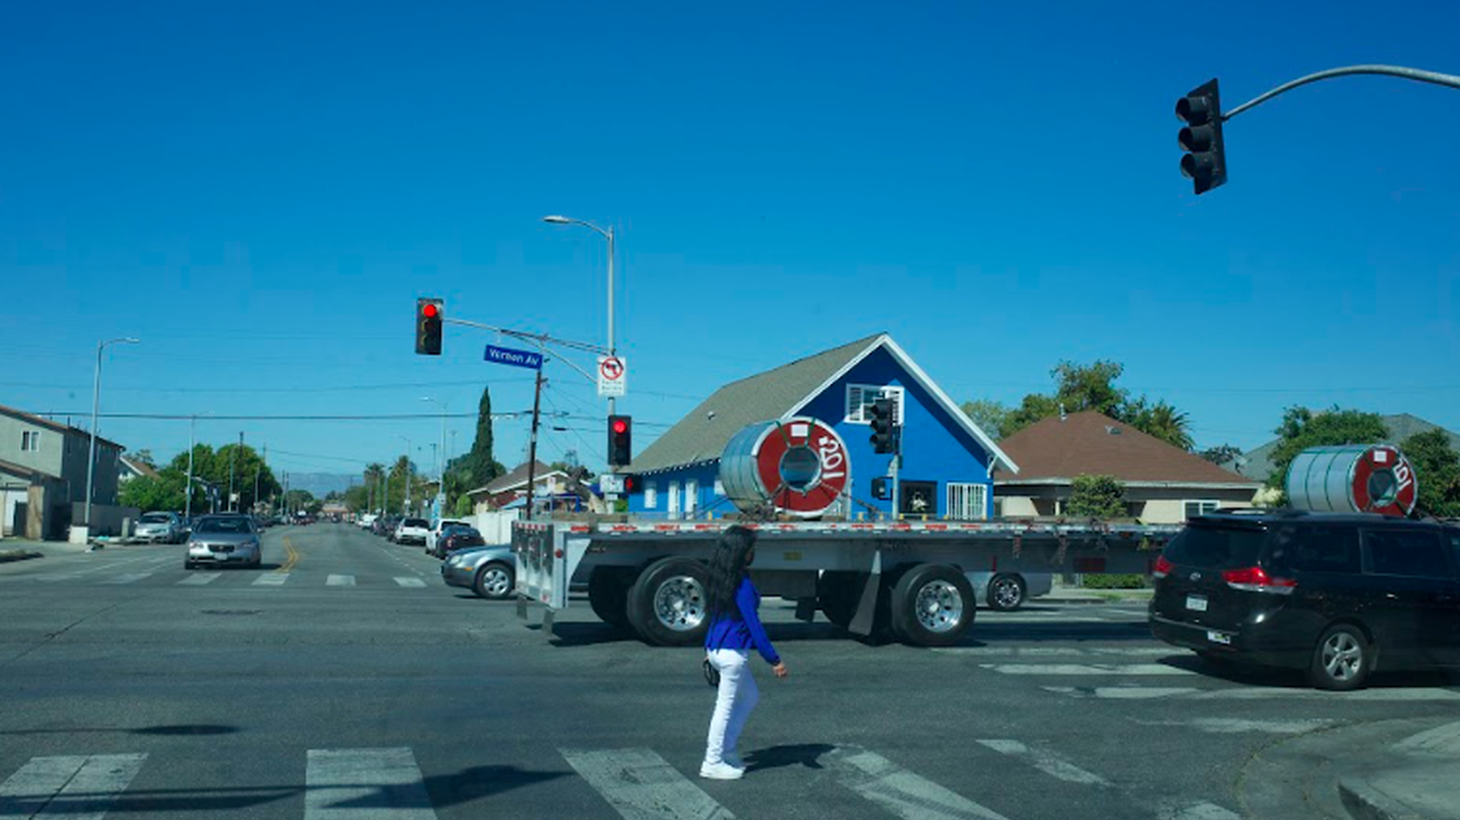 A person walks through a traffic intersection at Vernon Ave. and San Pedro St. in South LA.